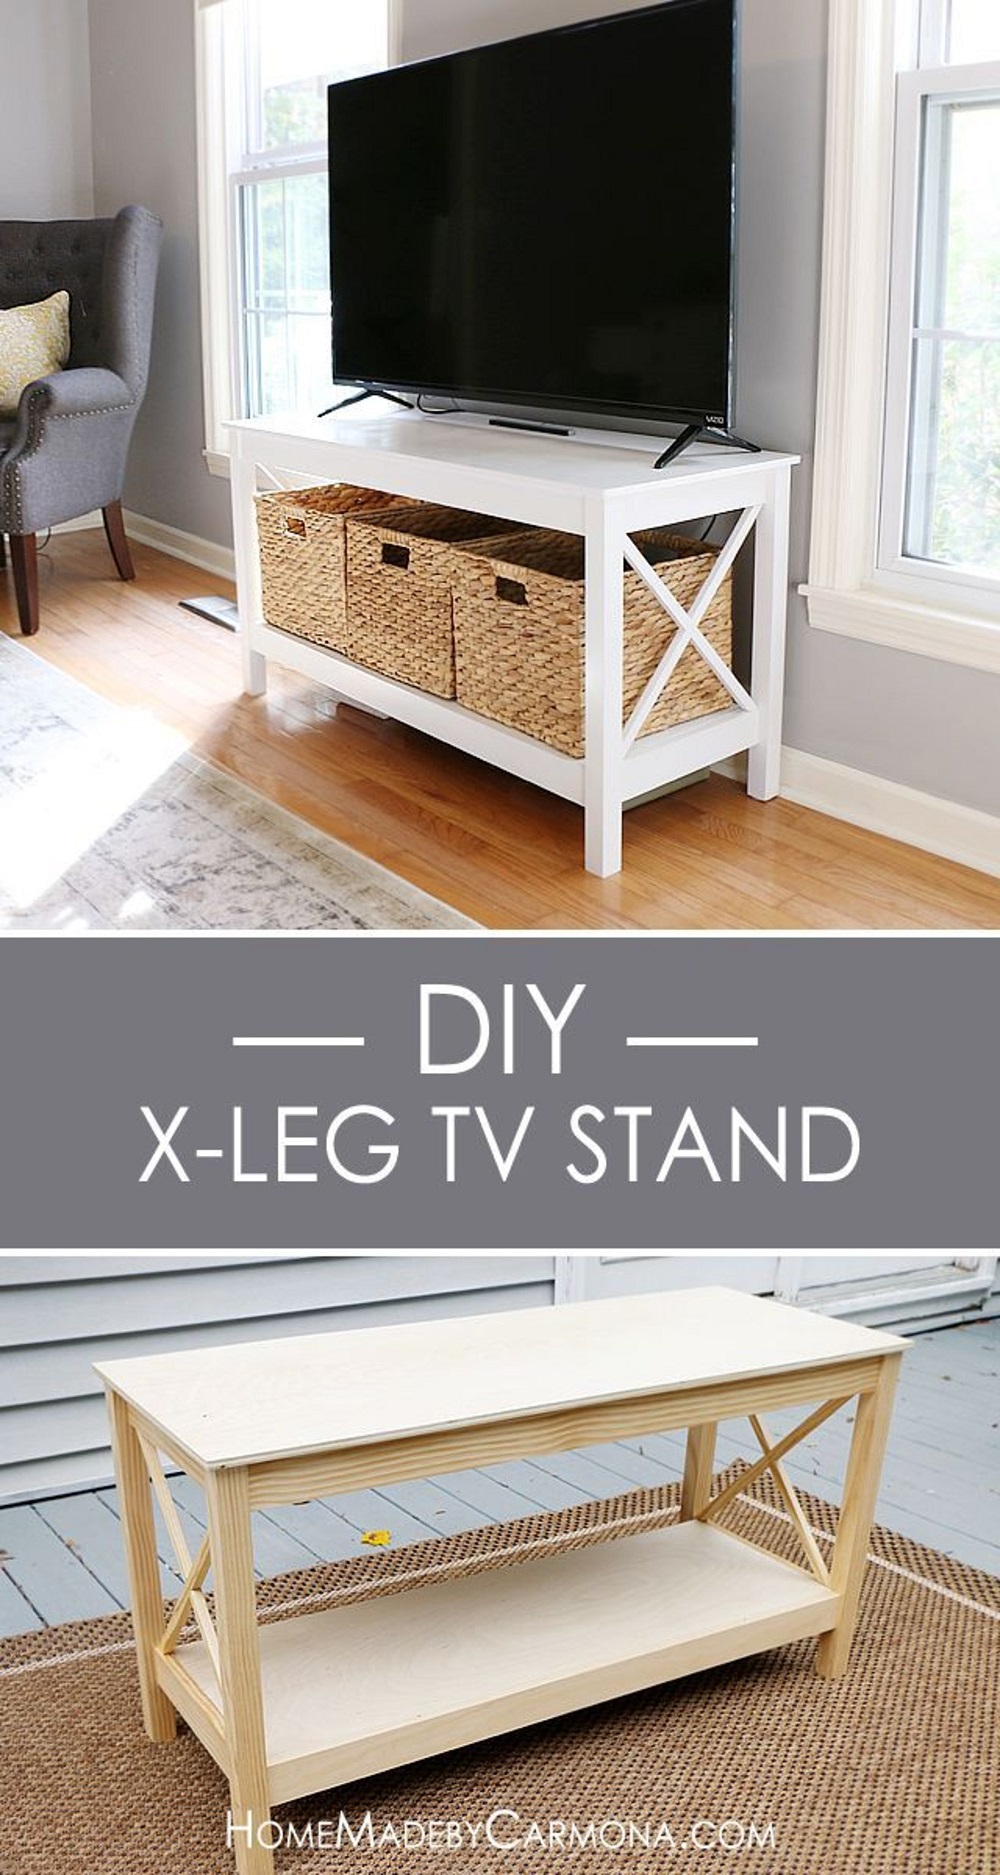 pix4-7 DIY TV stand ideas and examples, you could set up in your home